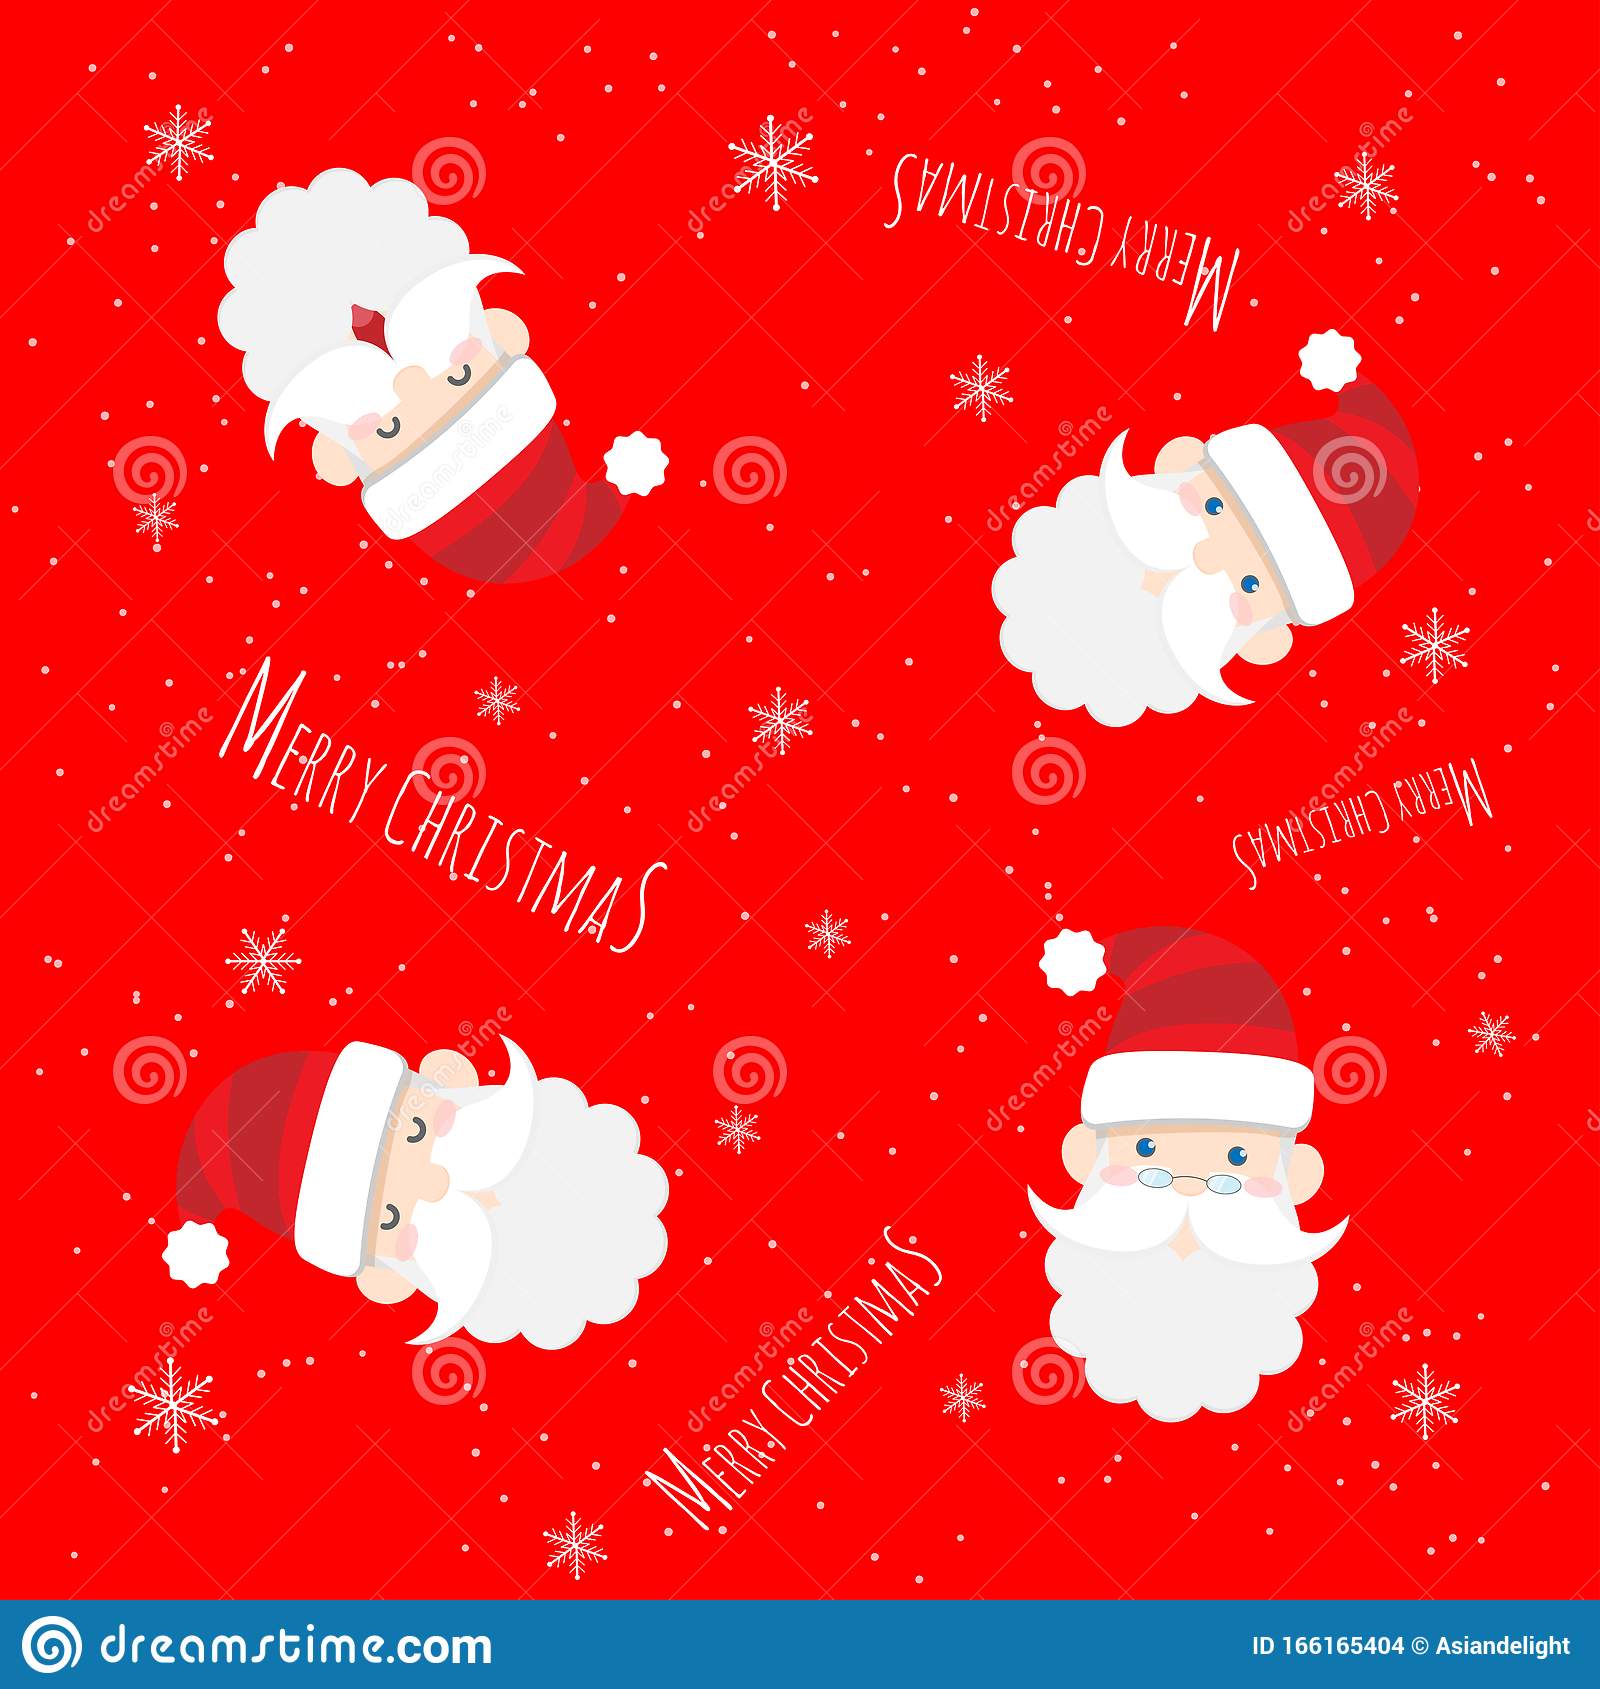 Vector cute santa claus cartoon with text merry christmas pattern on red background for christmas wallpaper background stock vector